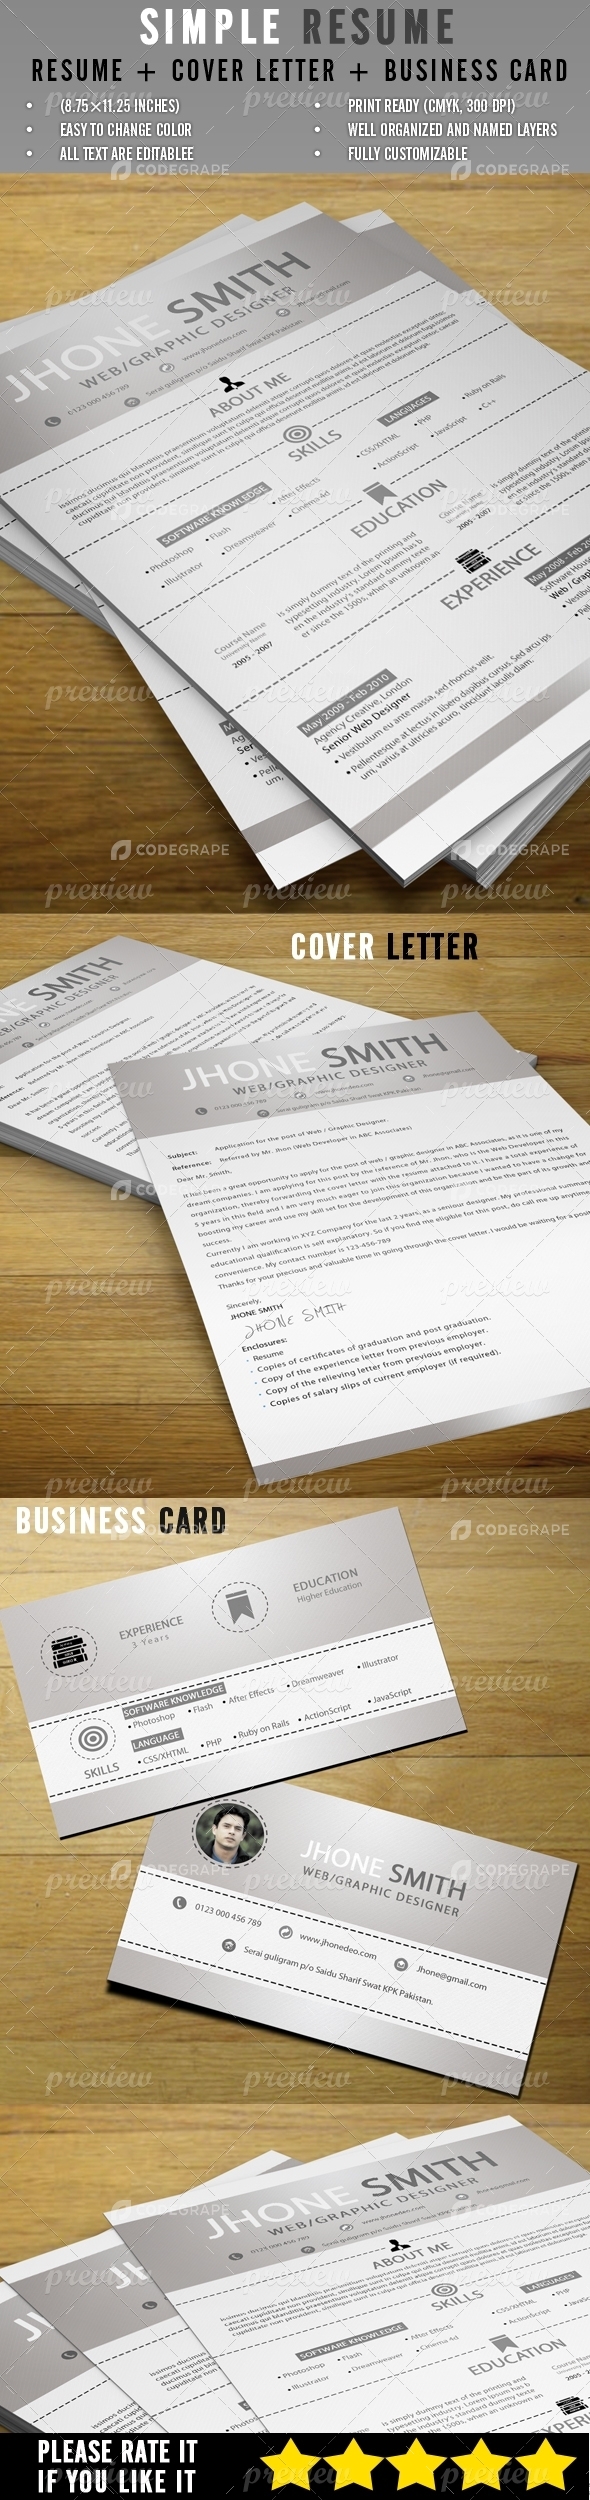 Resume + Cover Letter + Business Card